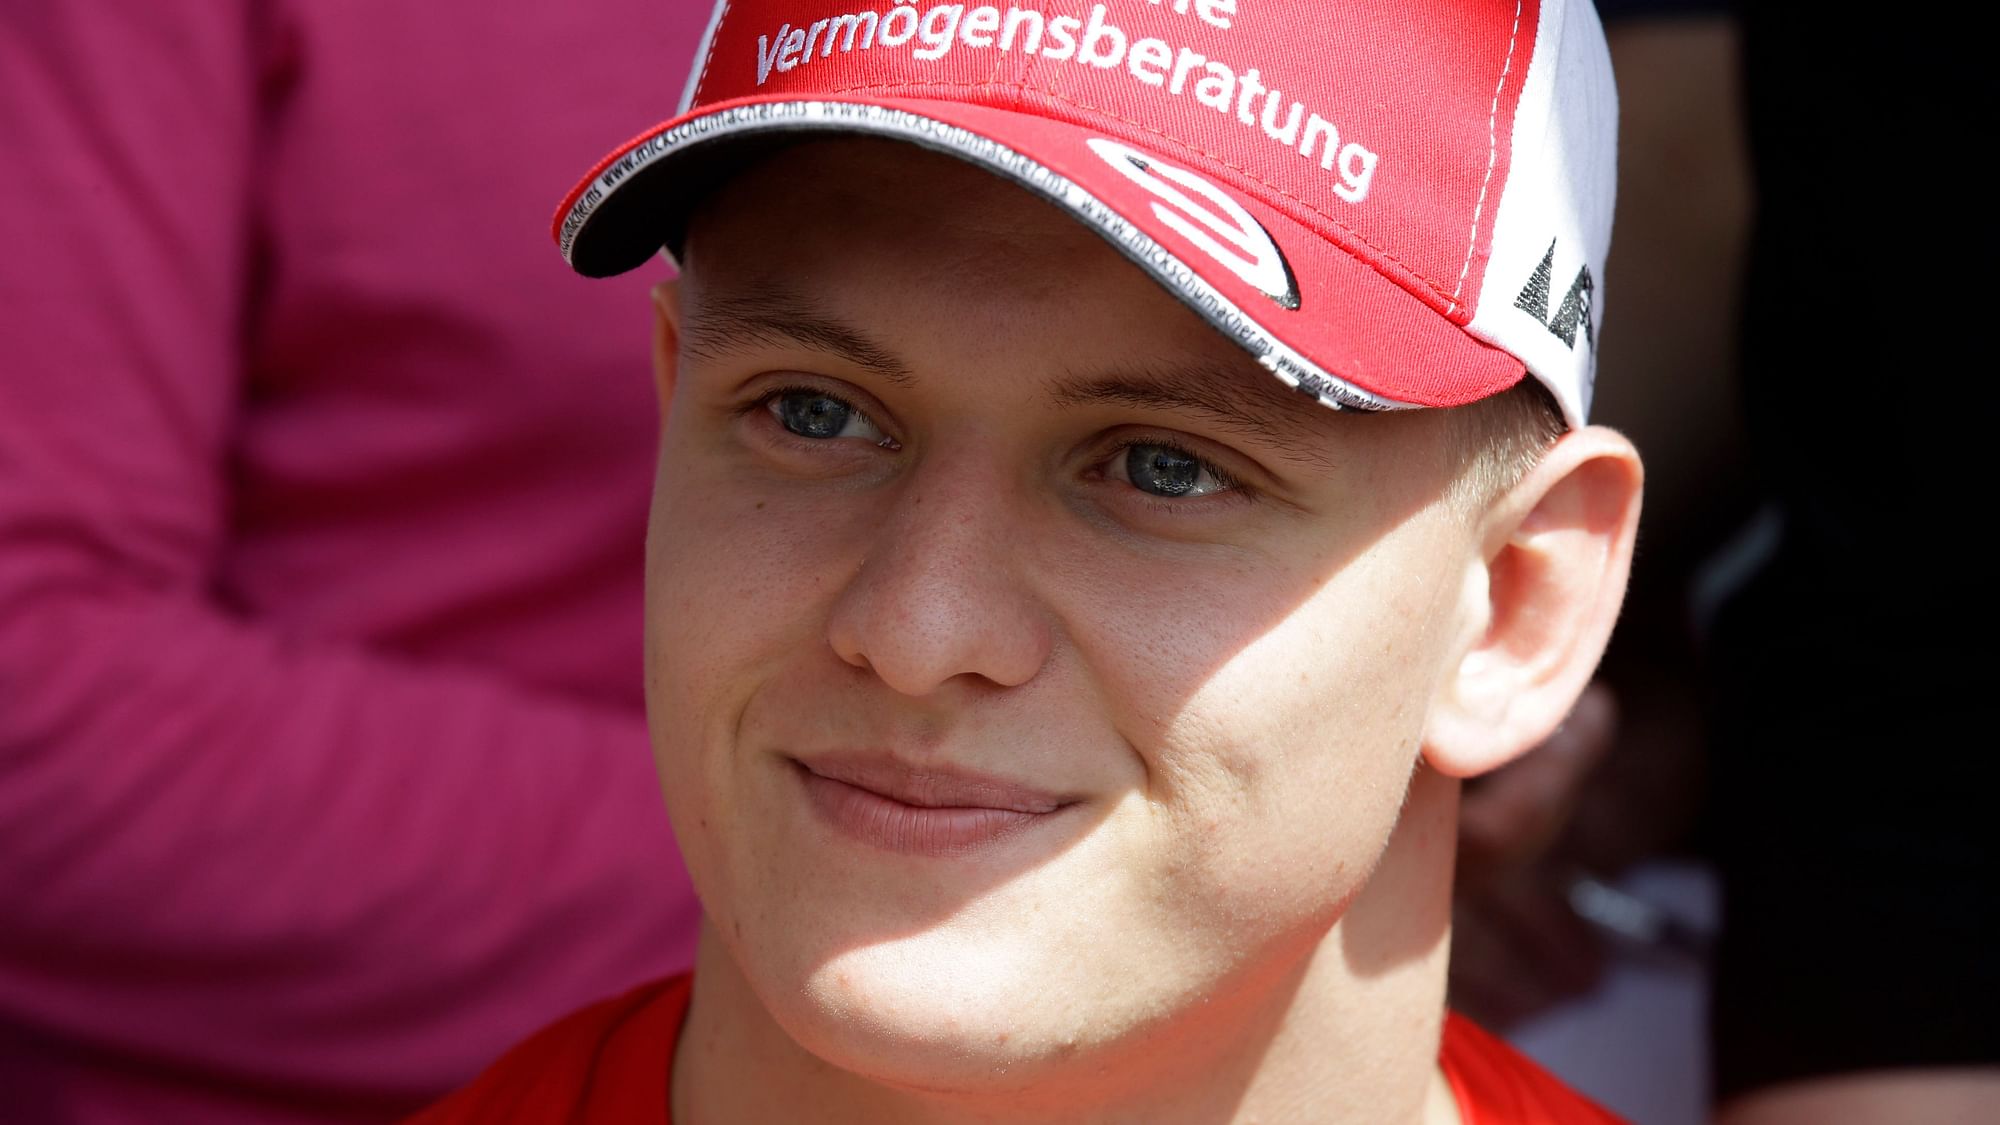 Mick Schumacher -- son of seven-time world champion Michael Schumacher -- has signed a multi-year deal with Haas F1 team.